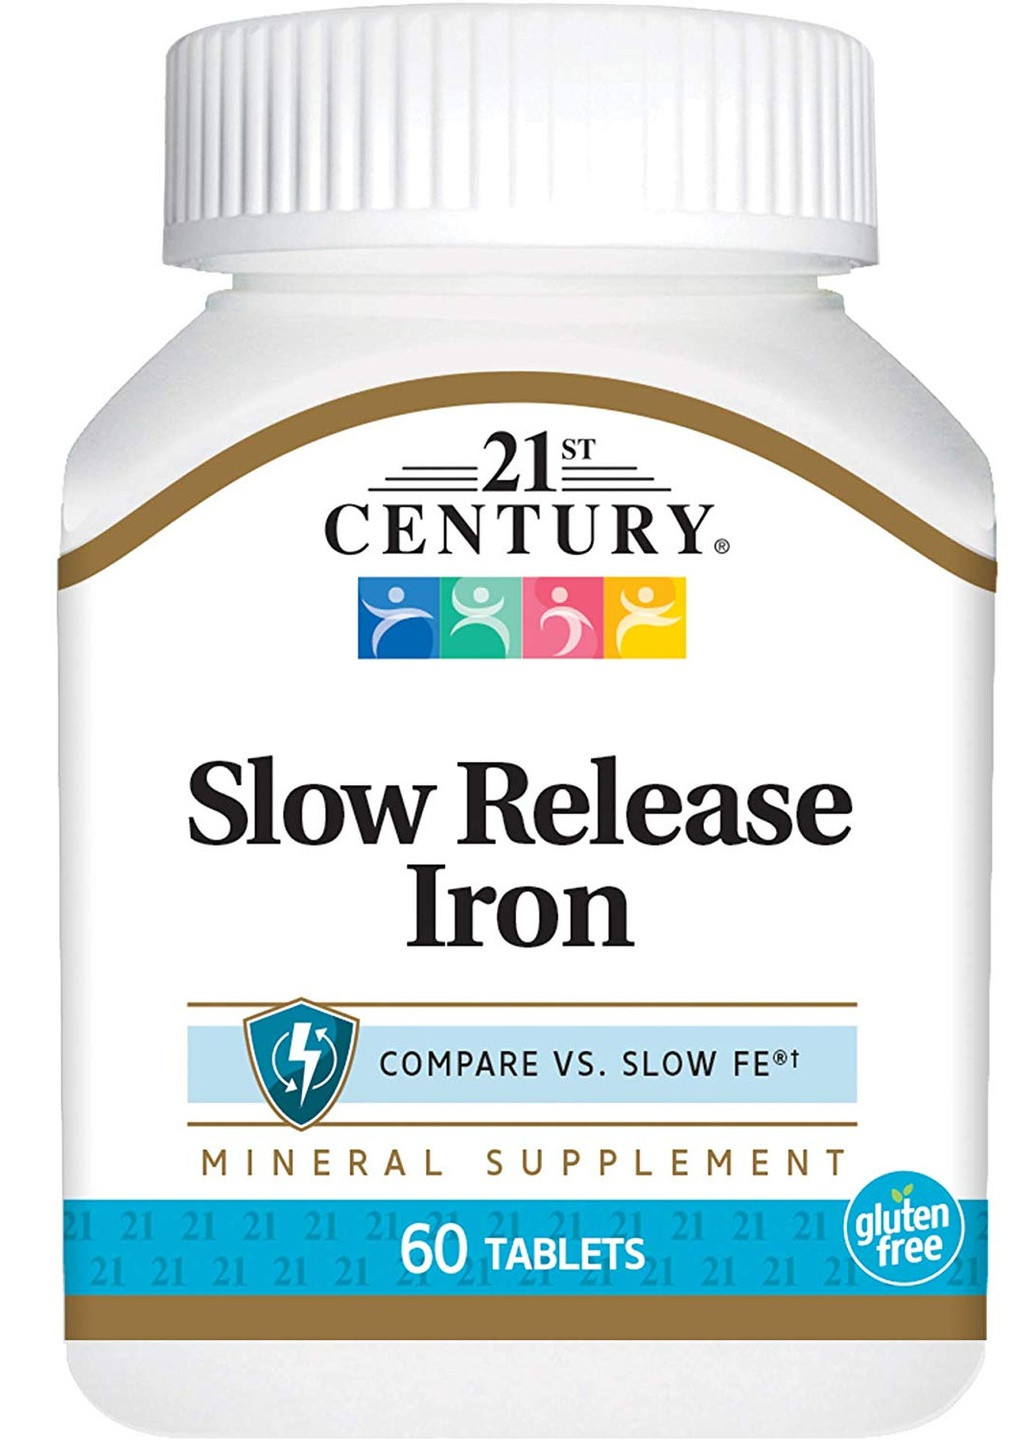 Залізо Slow Release Iron 45 mg 60 Tablets 21st Century (256225062)